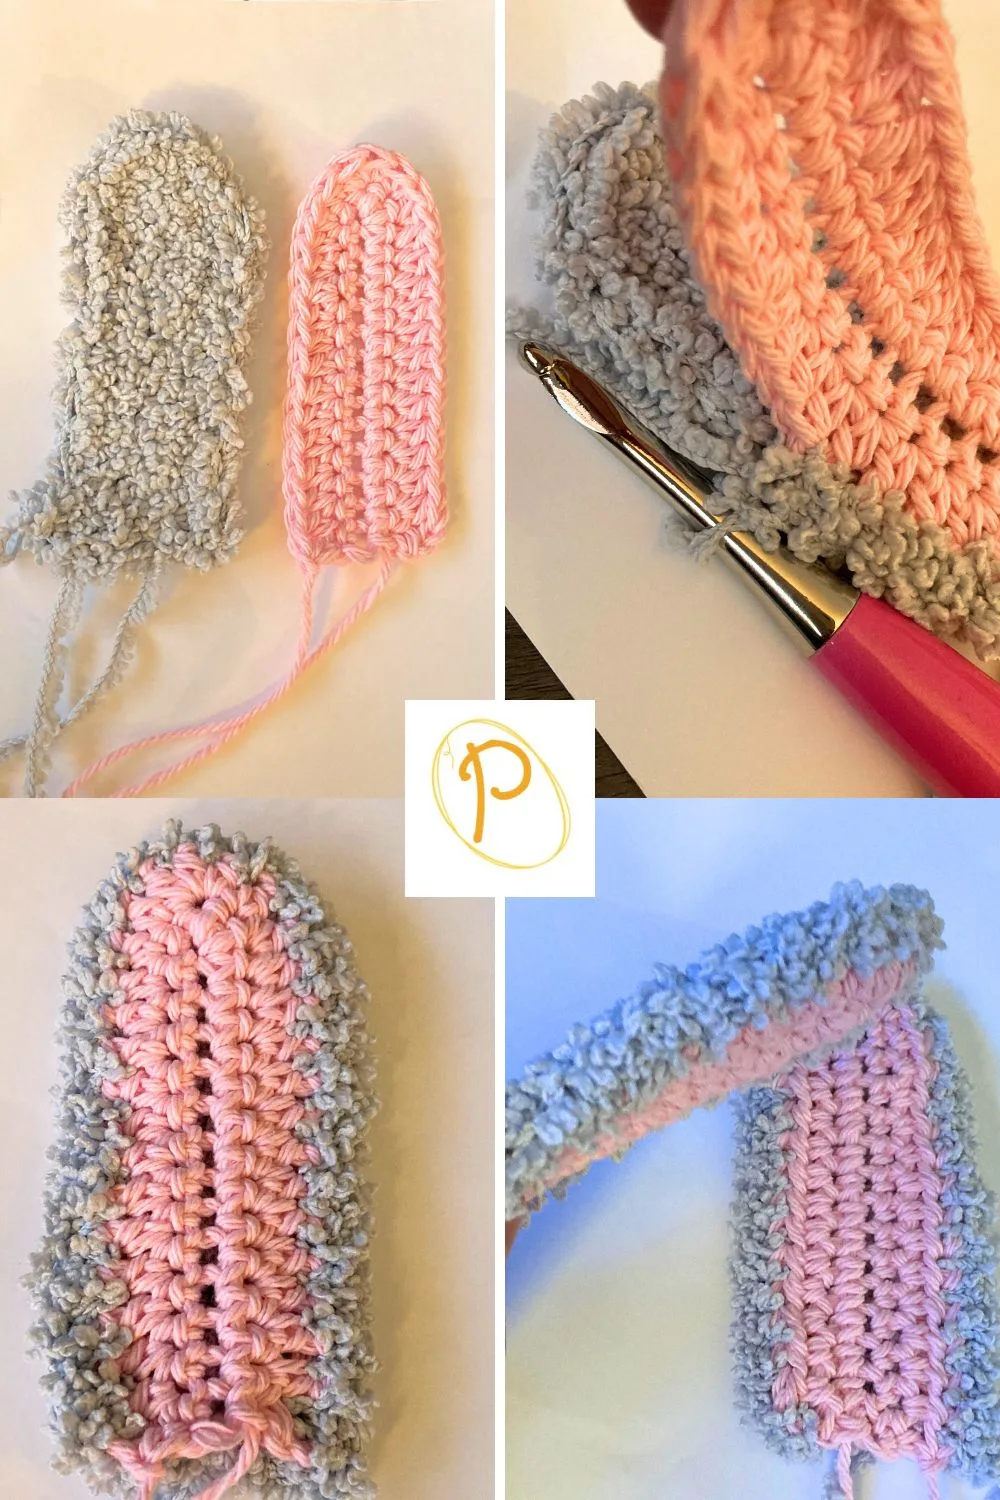 Crocheting Inner and Outer Bunny Ear